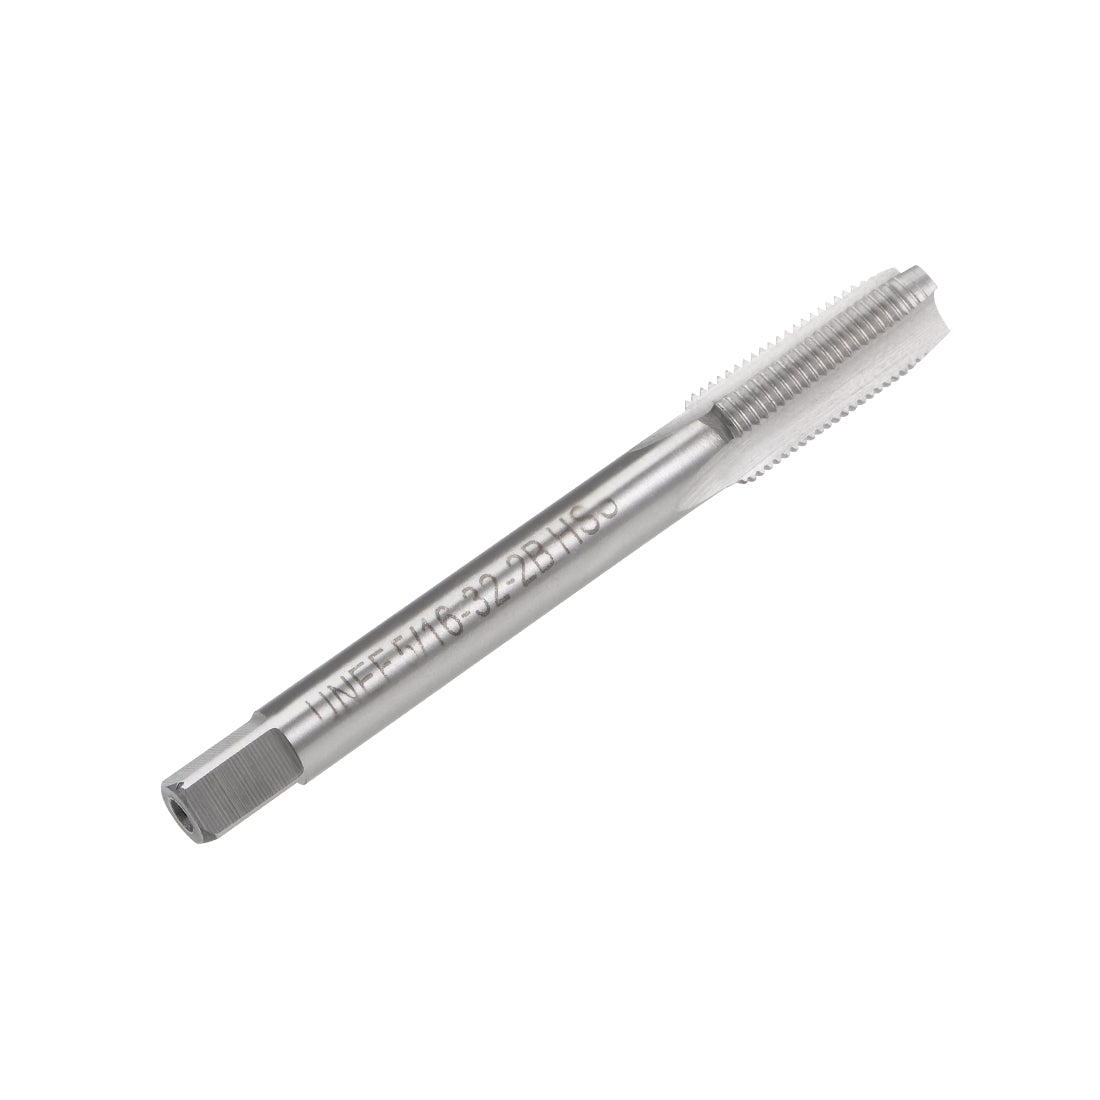 uxcell Uxcell Machine Tap 5/16-32 UNEF Thread Pitch 2B 3 Flutes High Speed Steel for Tapping Drilling Machine